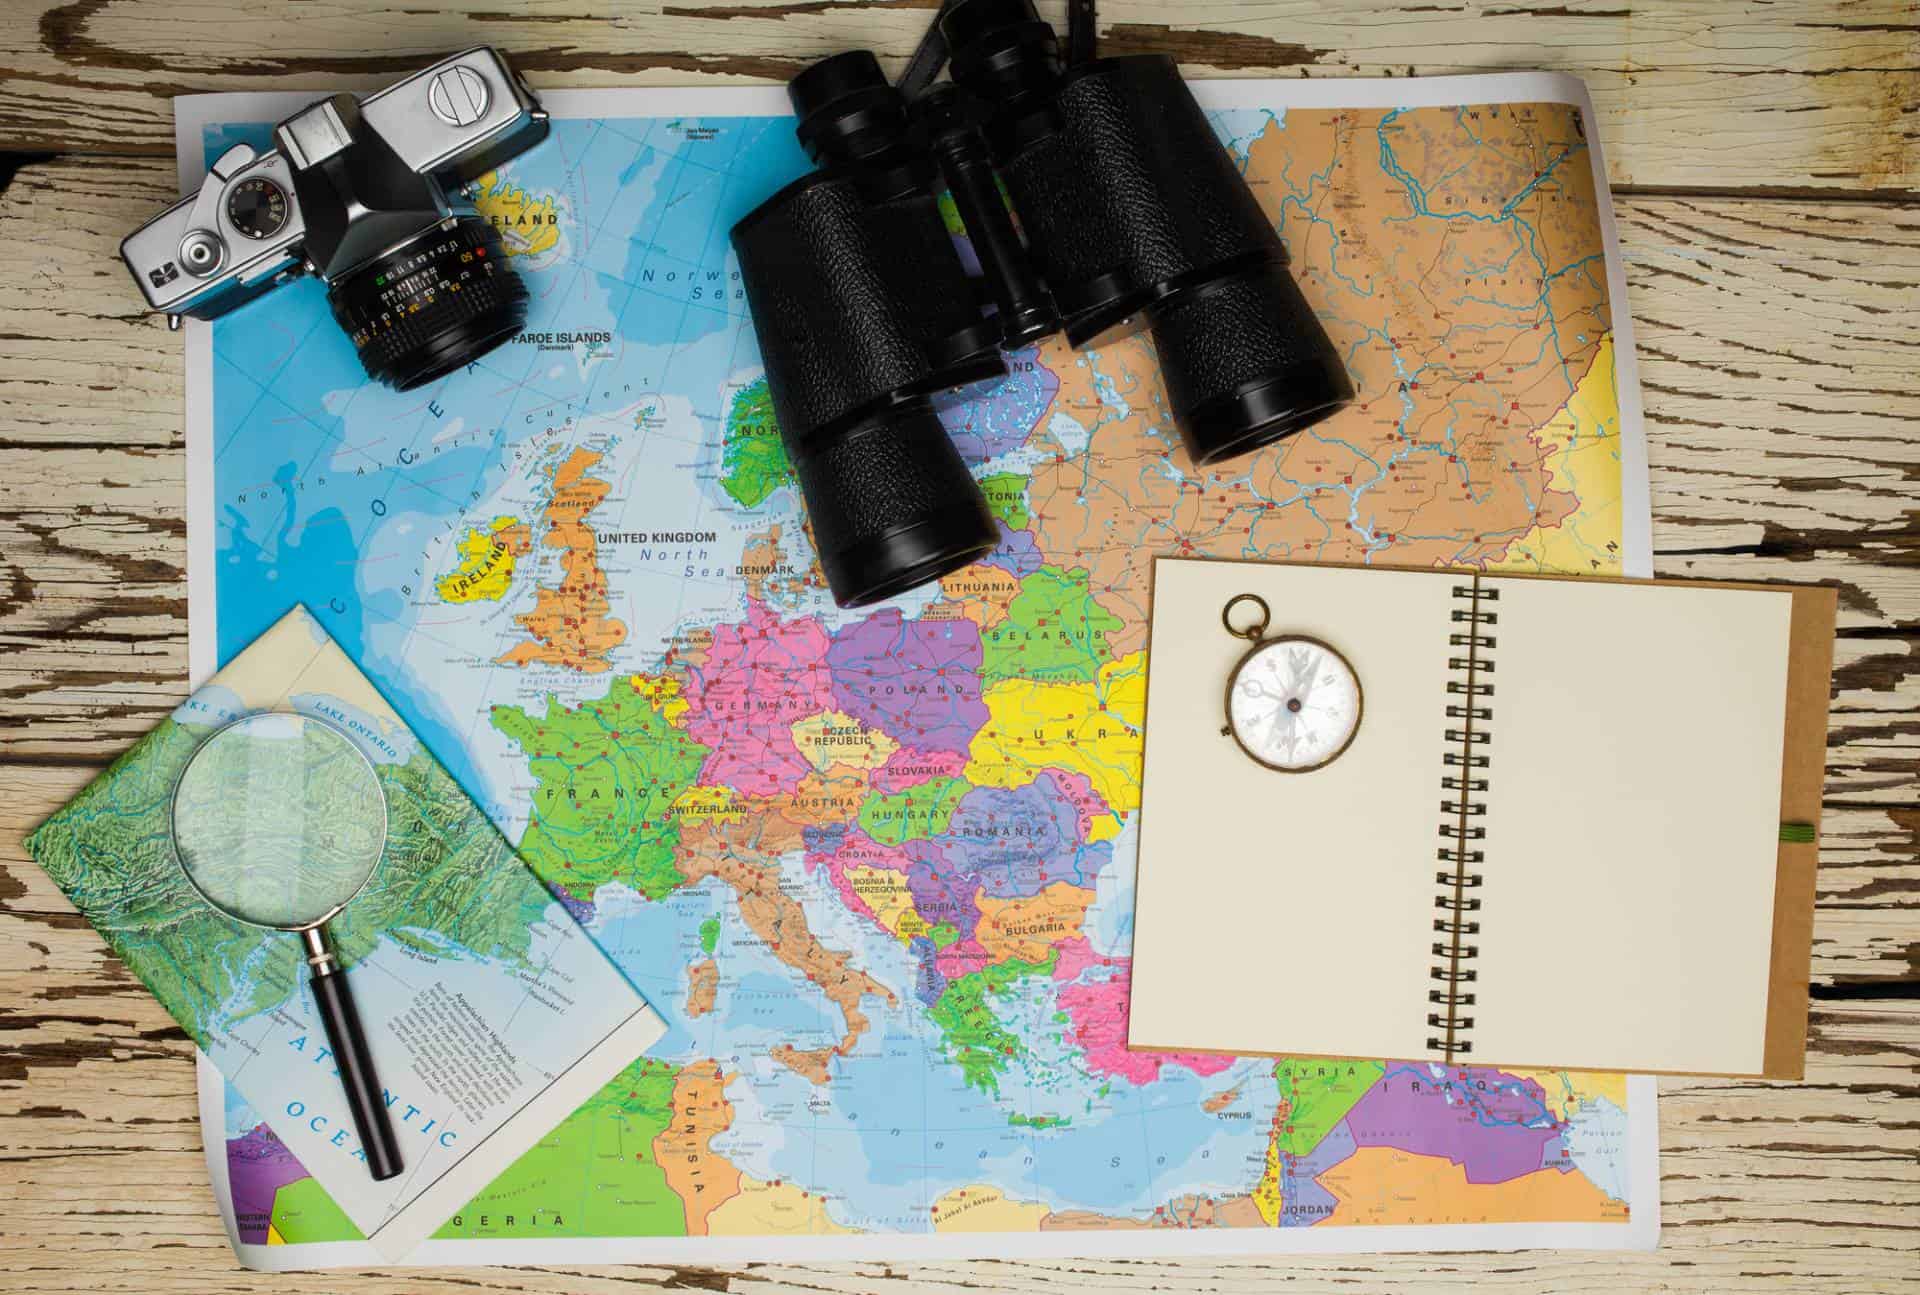 Top view of notebook, binoculars, camera, magnifying glass, pocket watch and map of Europe.